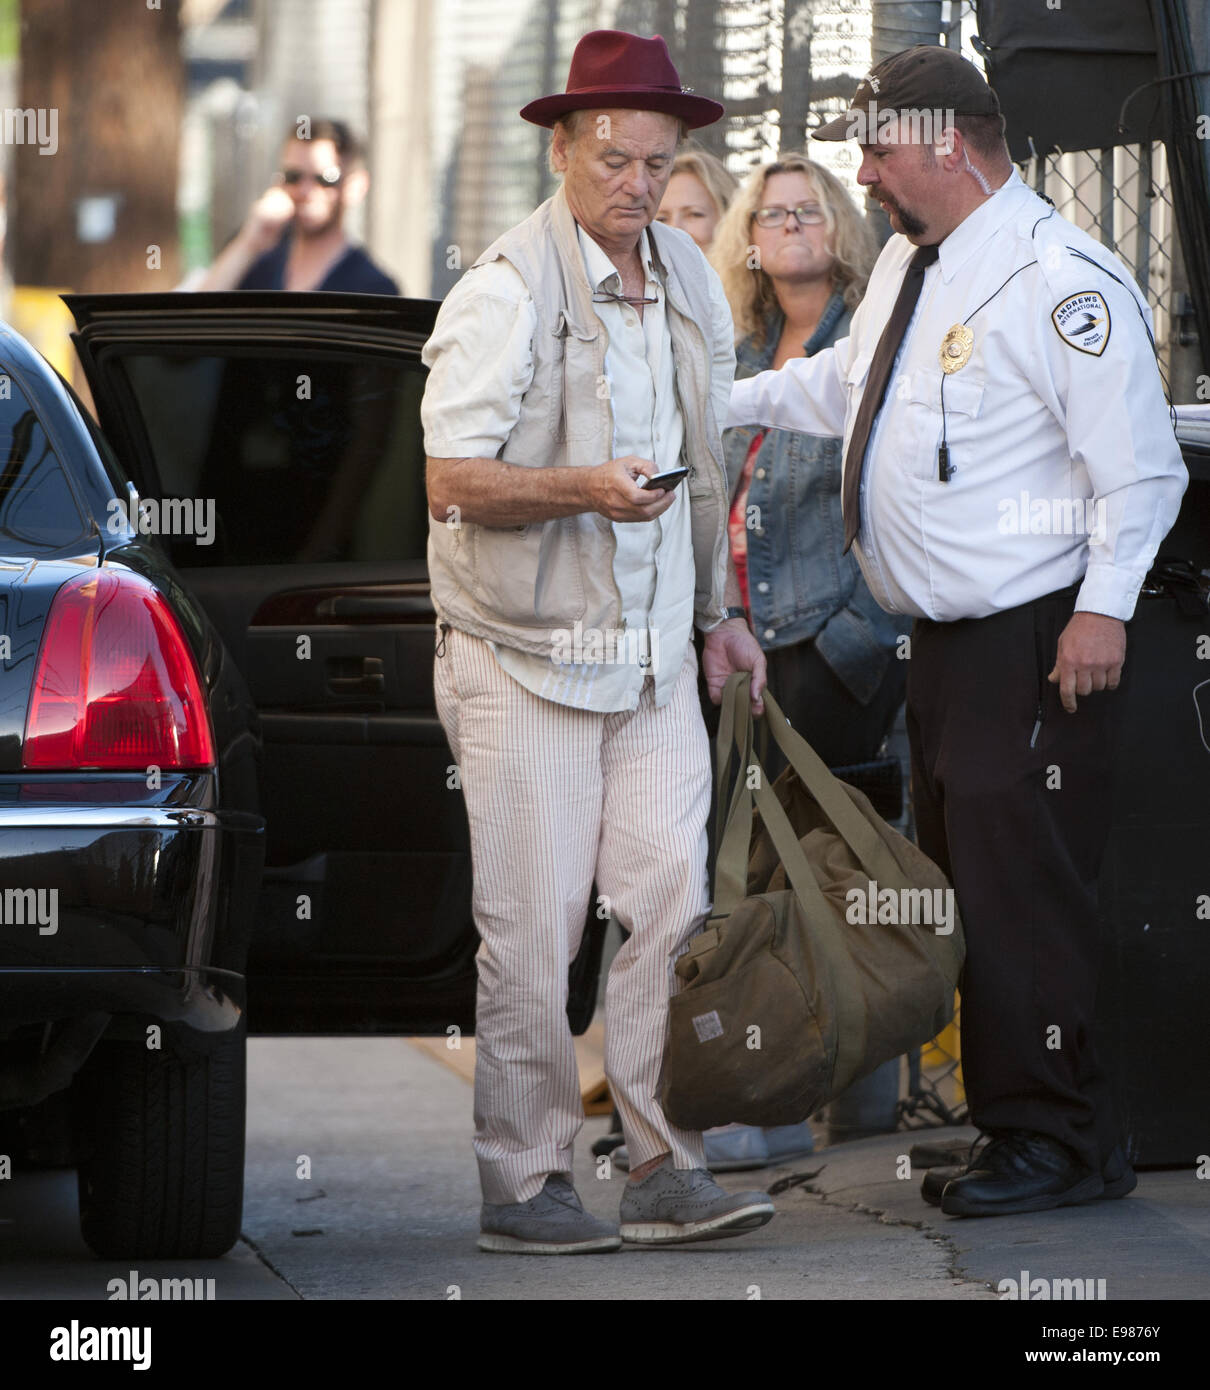 Hollywood, California, USA. 21st Oct, 2014. Canadian born comedian and actor, Bill Murray, taped an appearance for Jimmy Kimmel Live! at the El Capitan Theatre in Hollywood on Tuesday October 21, 2014. Credit:  David Bro/ZUMA Wire/Alamy Live News Stock Photo